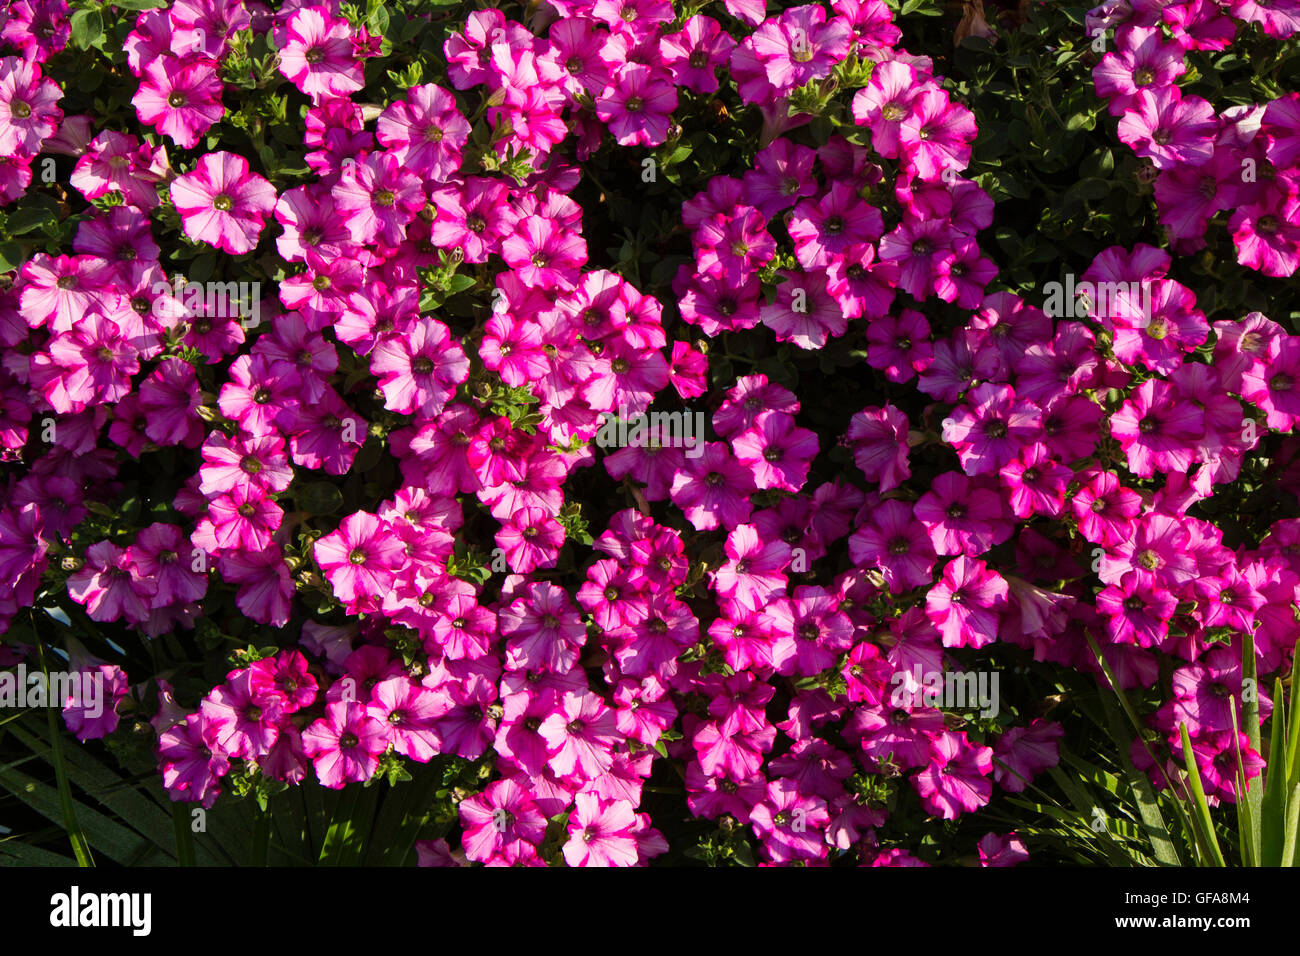 background of fucsia flowers called Campanula or bellflower Stock Photo